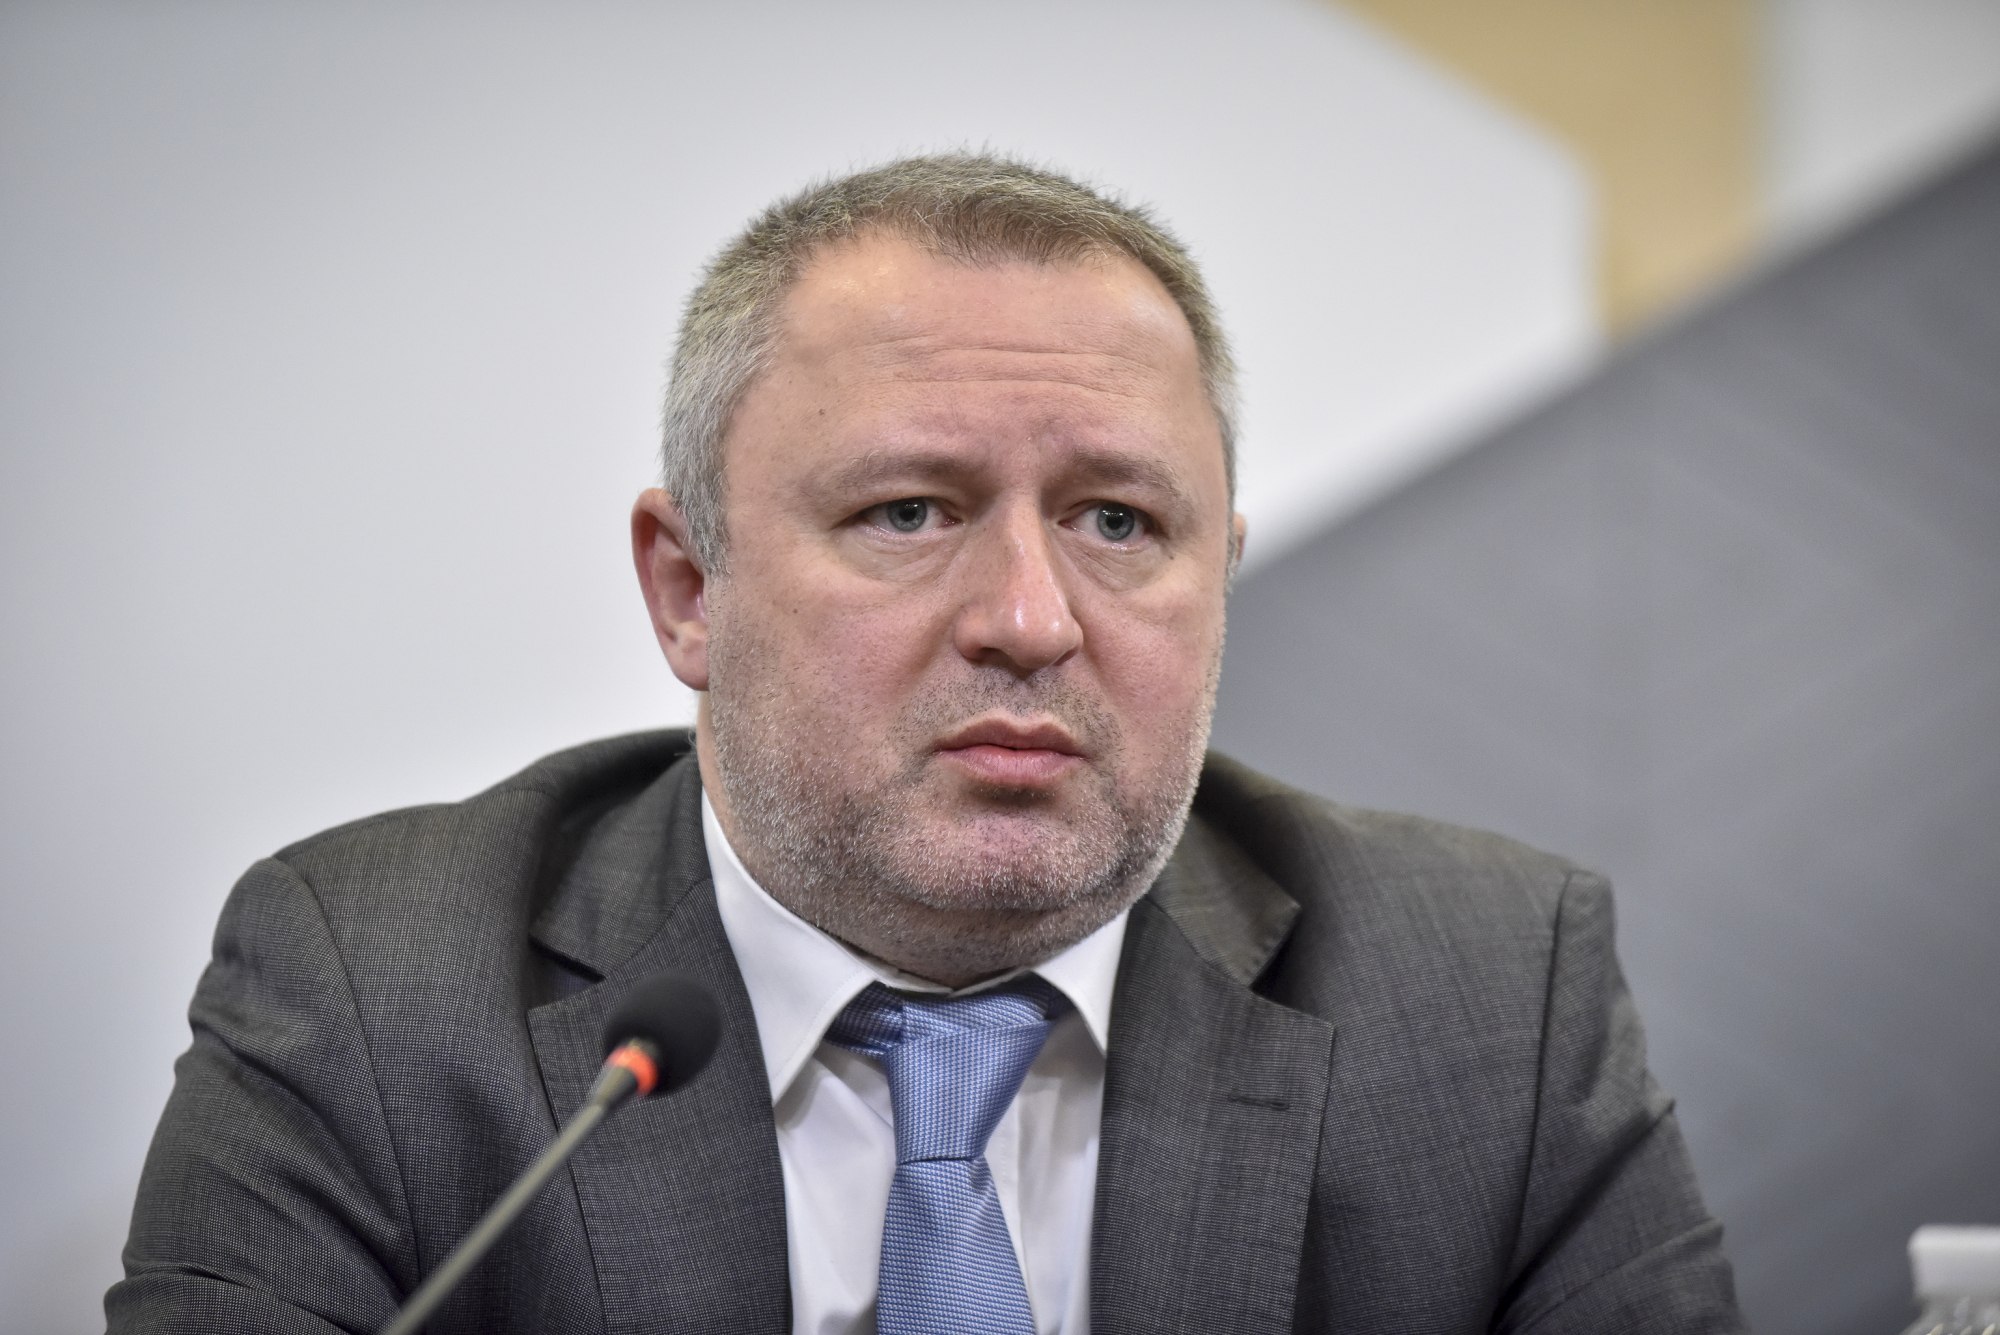 Andriy Kostin appointed prosecutor general. Here's what we know about him